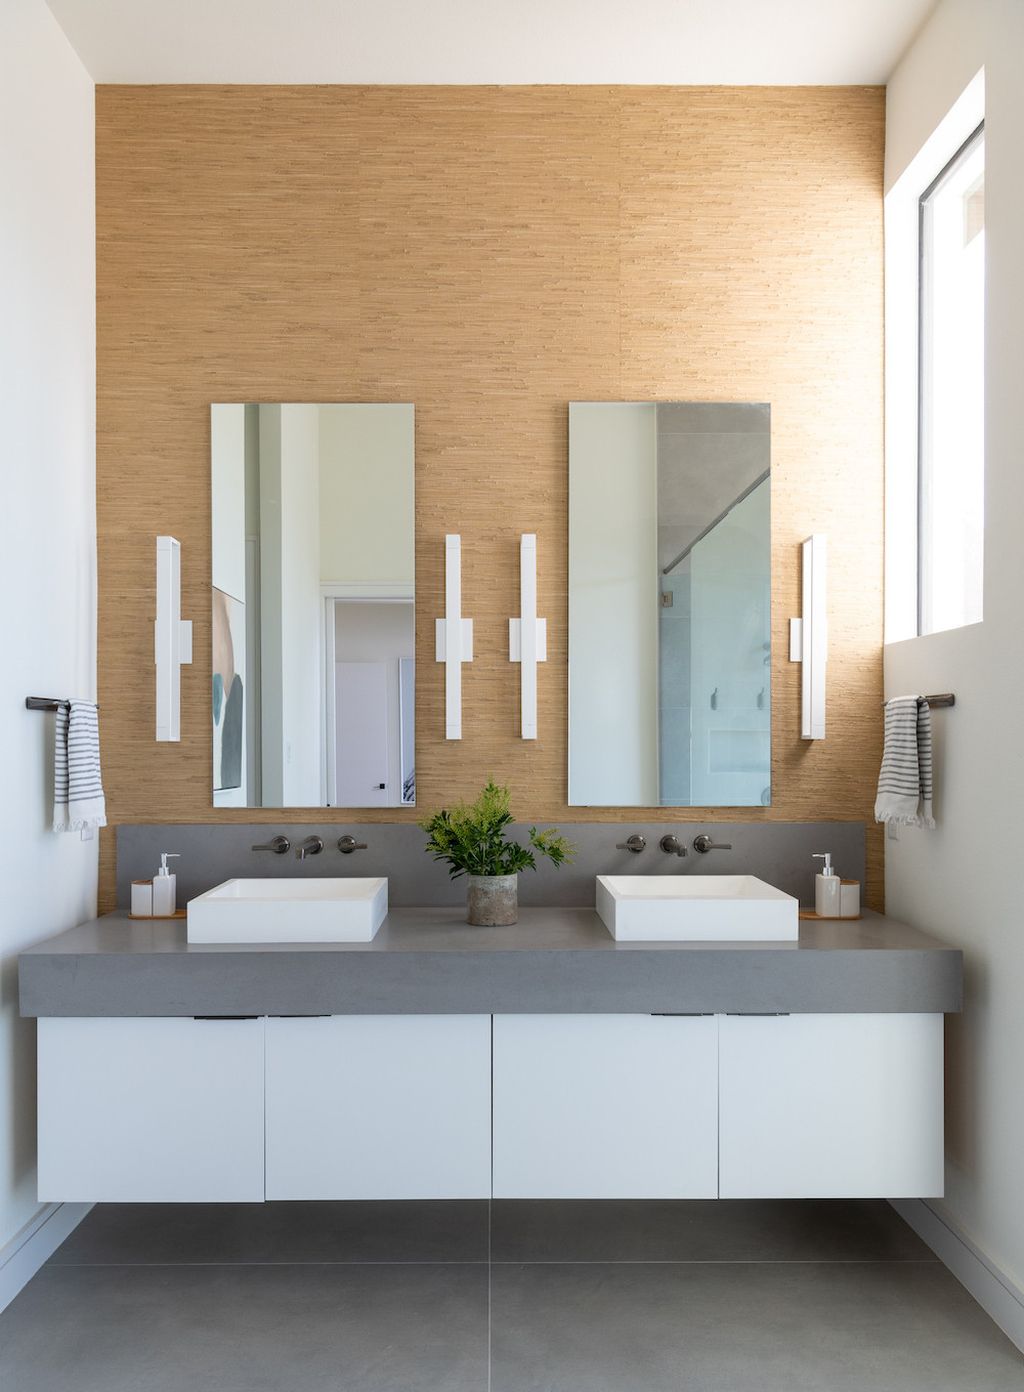 Opt for natural stone tiles like travertine or marble in neutral tones. These materials can add a touch of luxury and sophistication to the bathroom, while still blending nicely with the wooden elements.